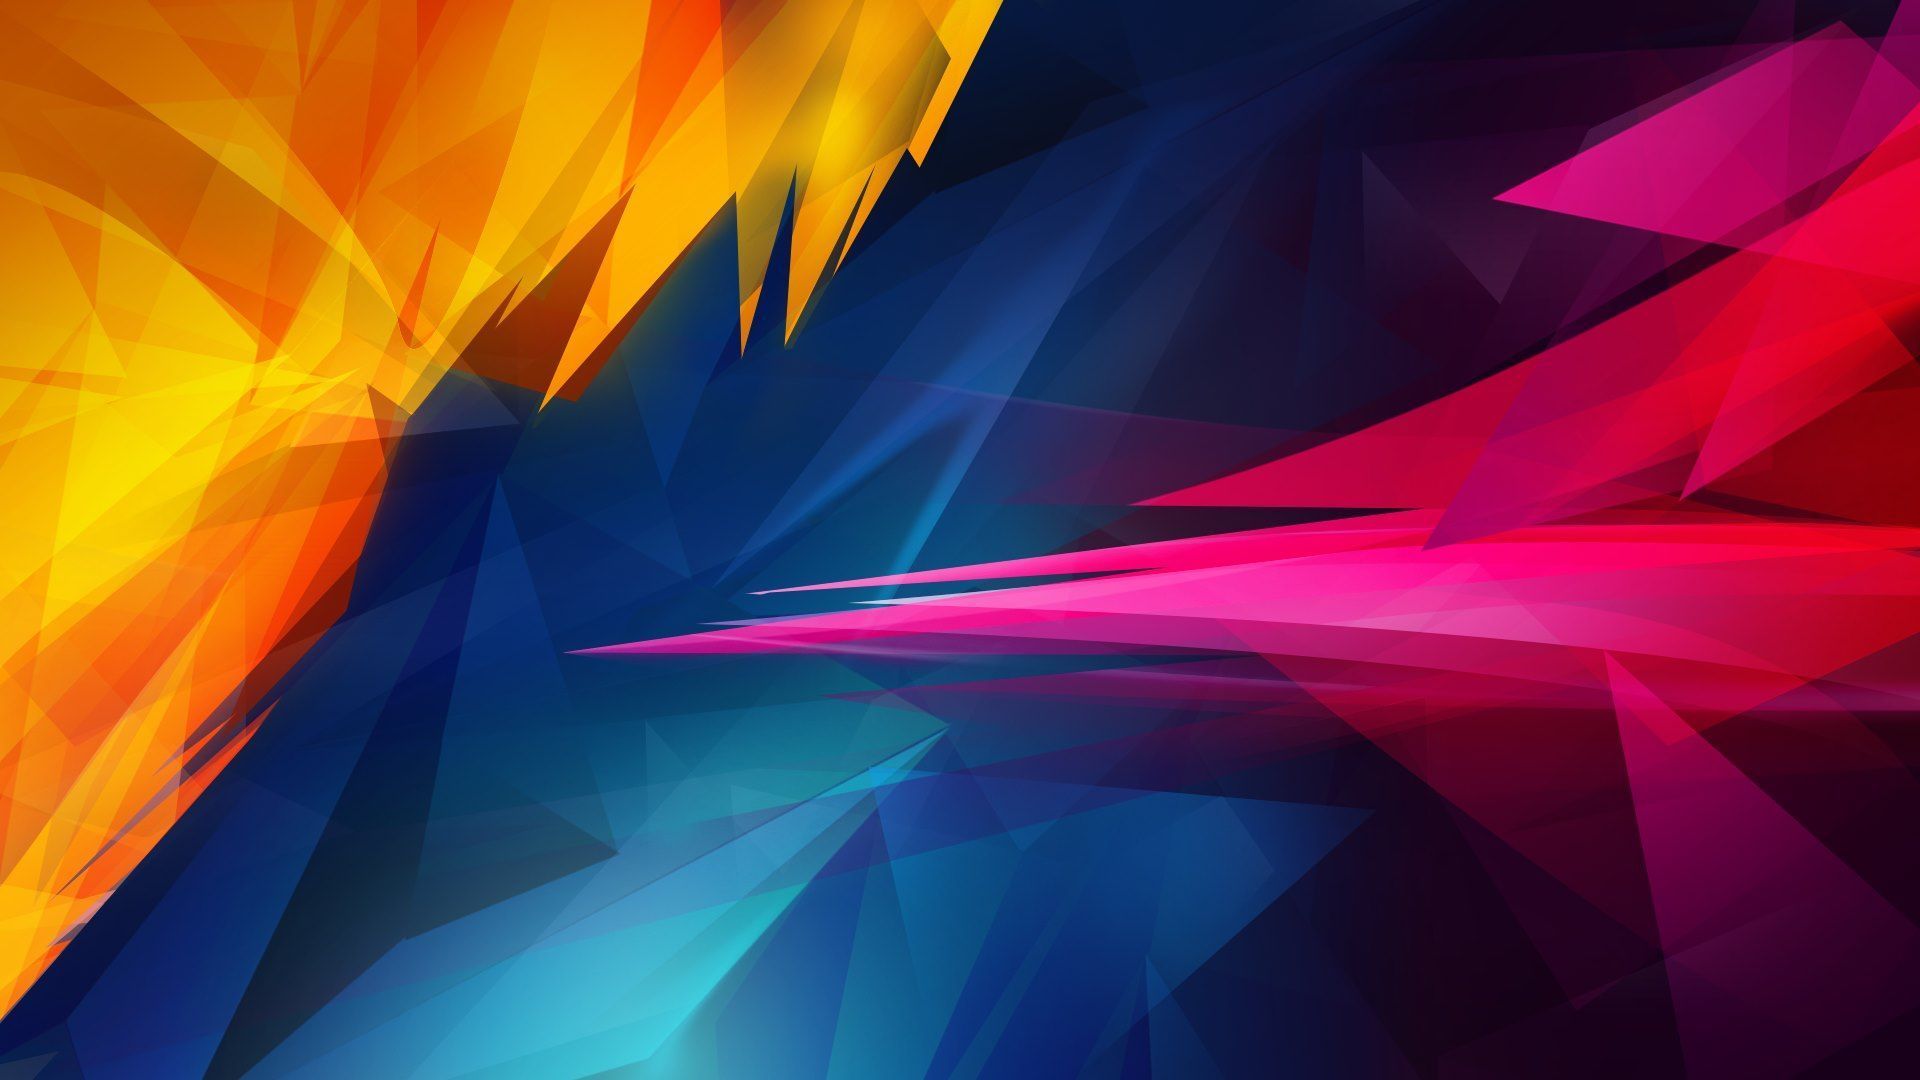 Abstract Sharp Shapes uhd wallpapers - Ultra High Definition ...